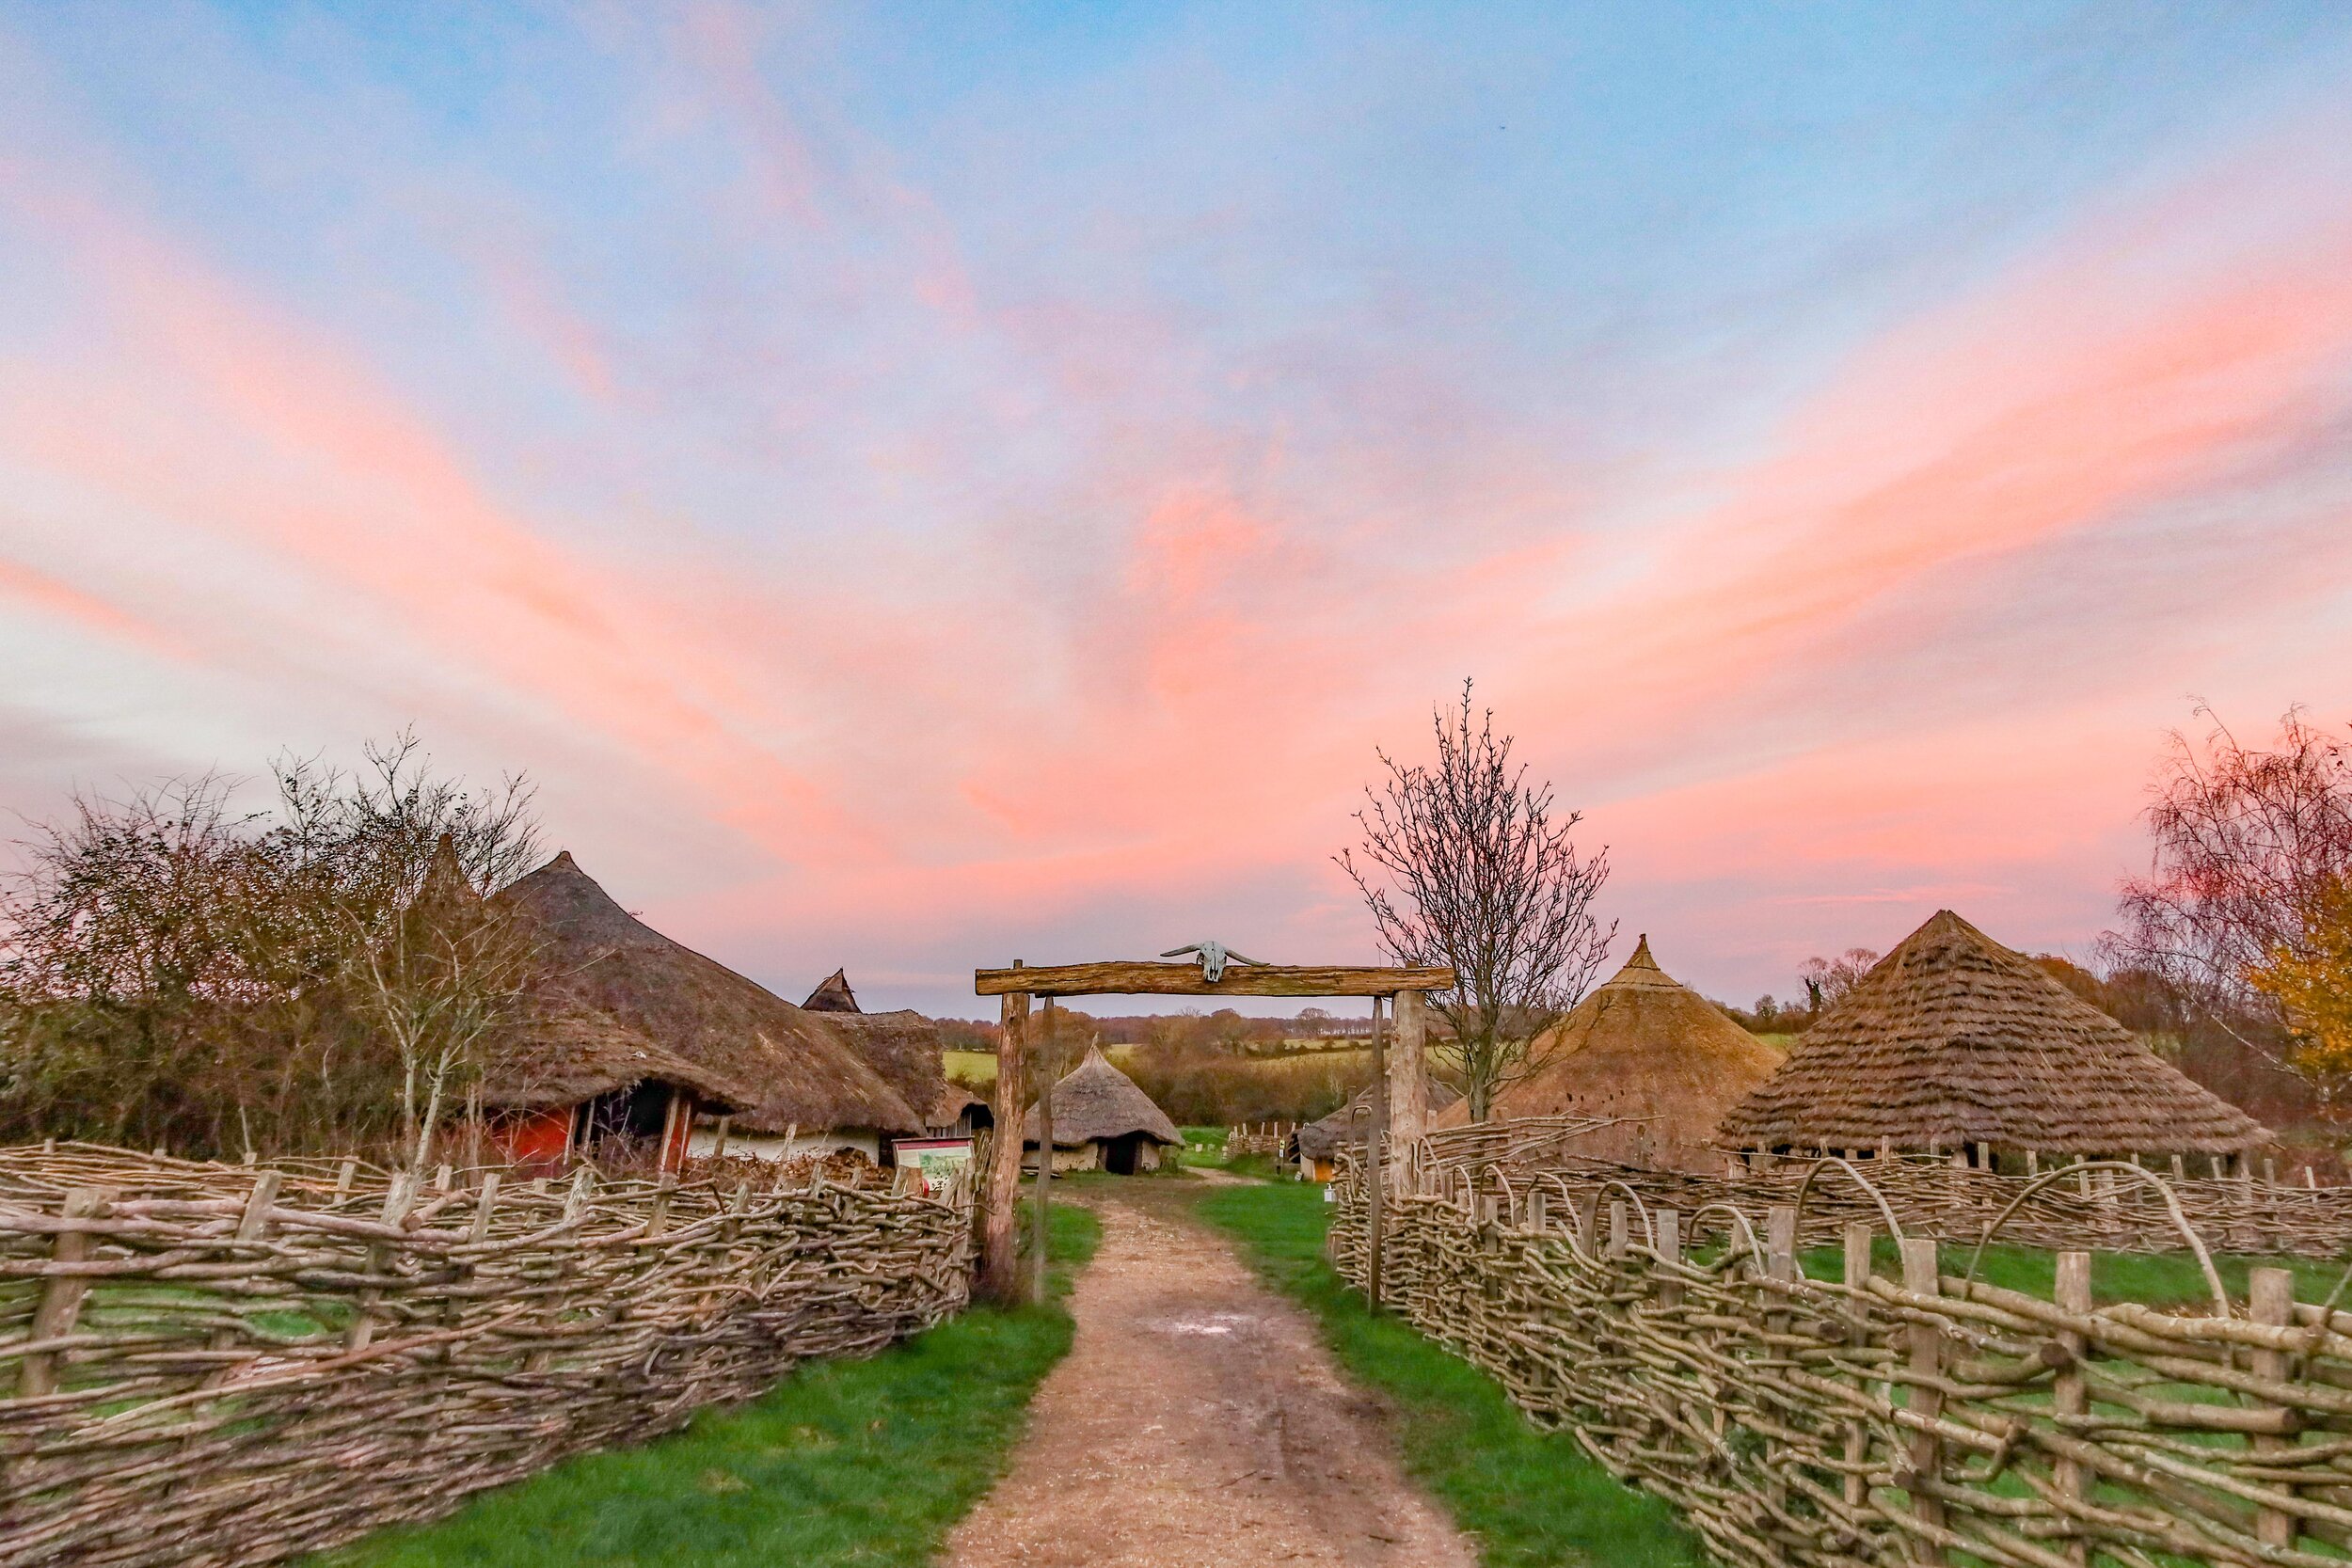 Pink skies above the Iron Age enclosure